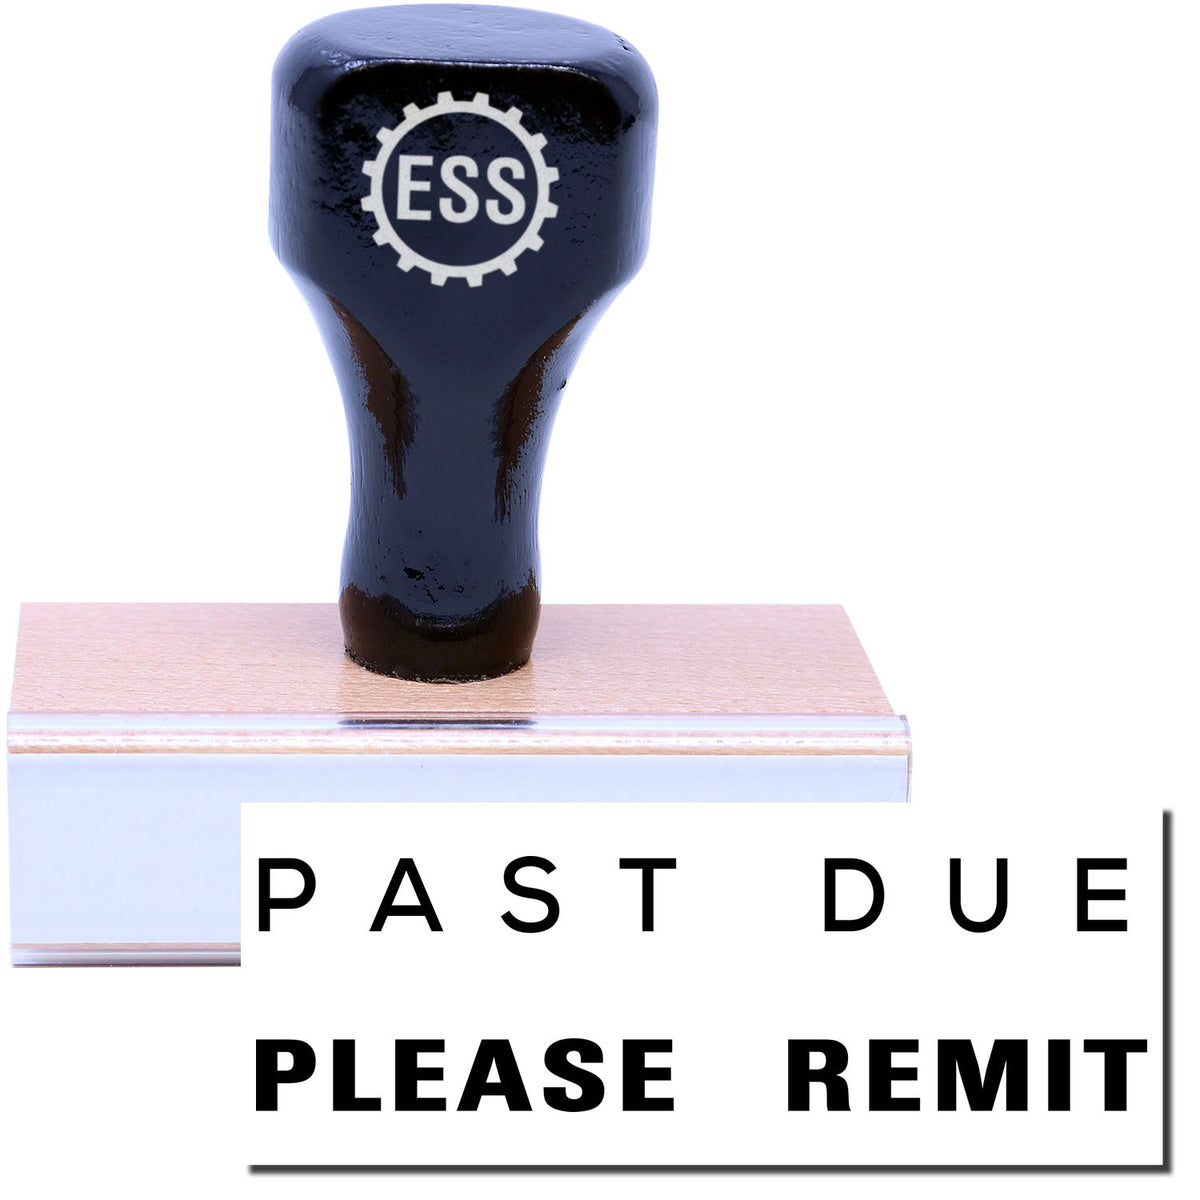 A stock office rubber stamp with a stamped image showing how the text &quot;PAST DUE PLEASE REMIT&quot; in a large font (&quot;PAST DUE&quot; in a narrow font and &quot;PLEASE REMIT&quot; in a bold font) is displayed after stamping.